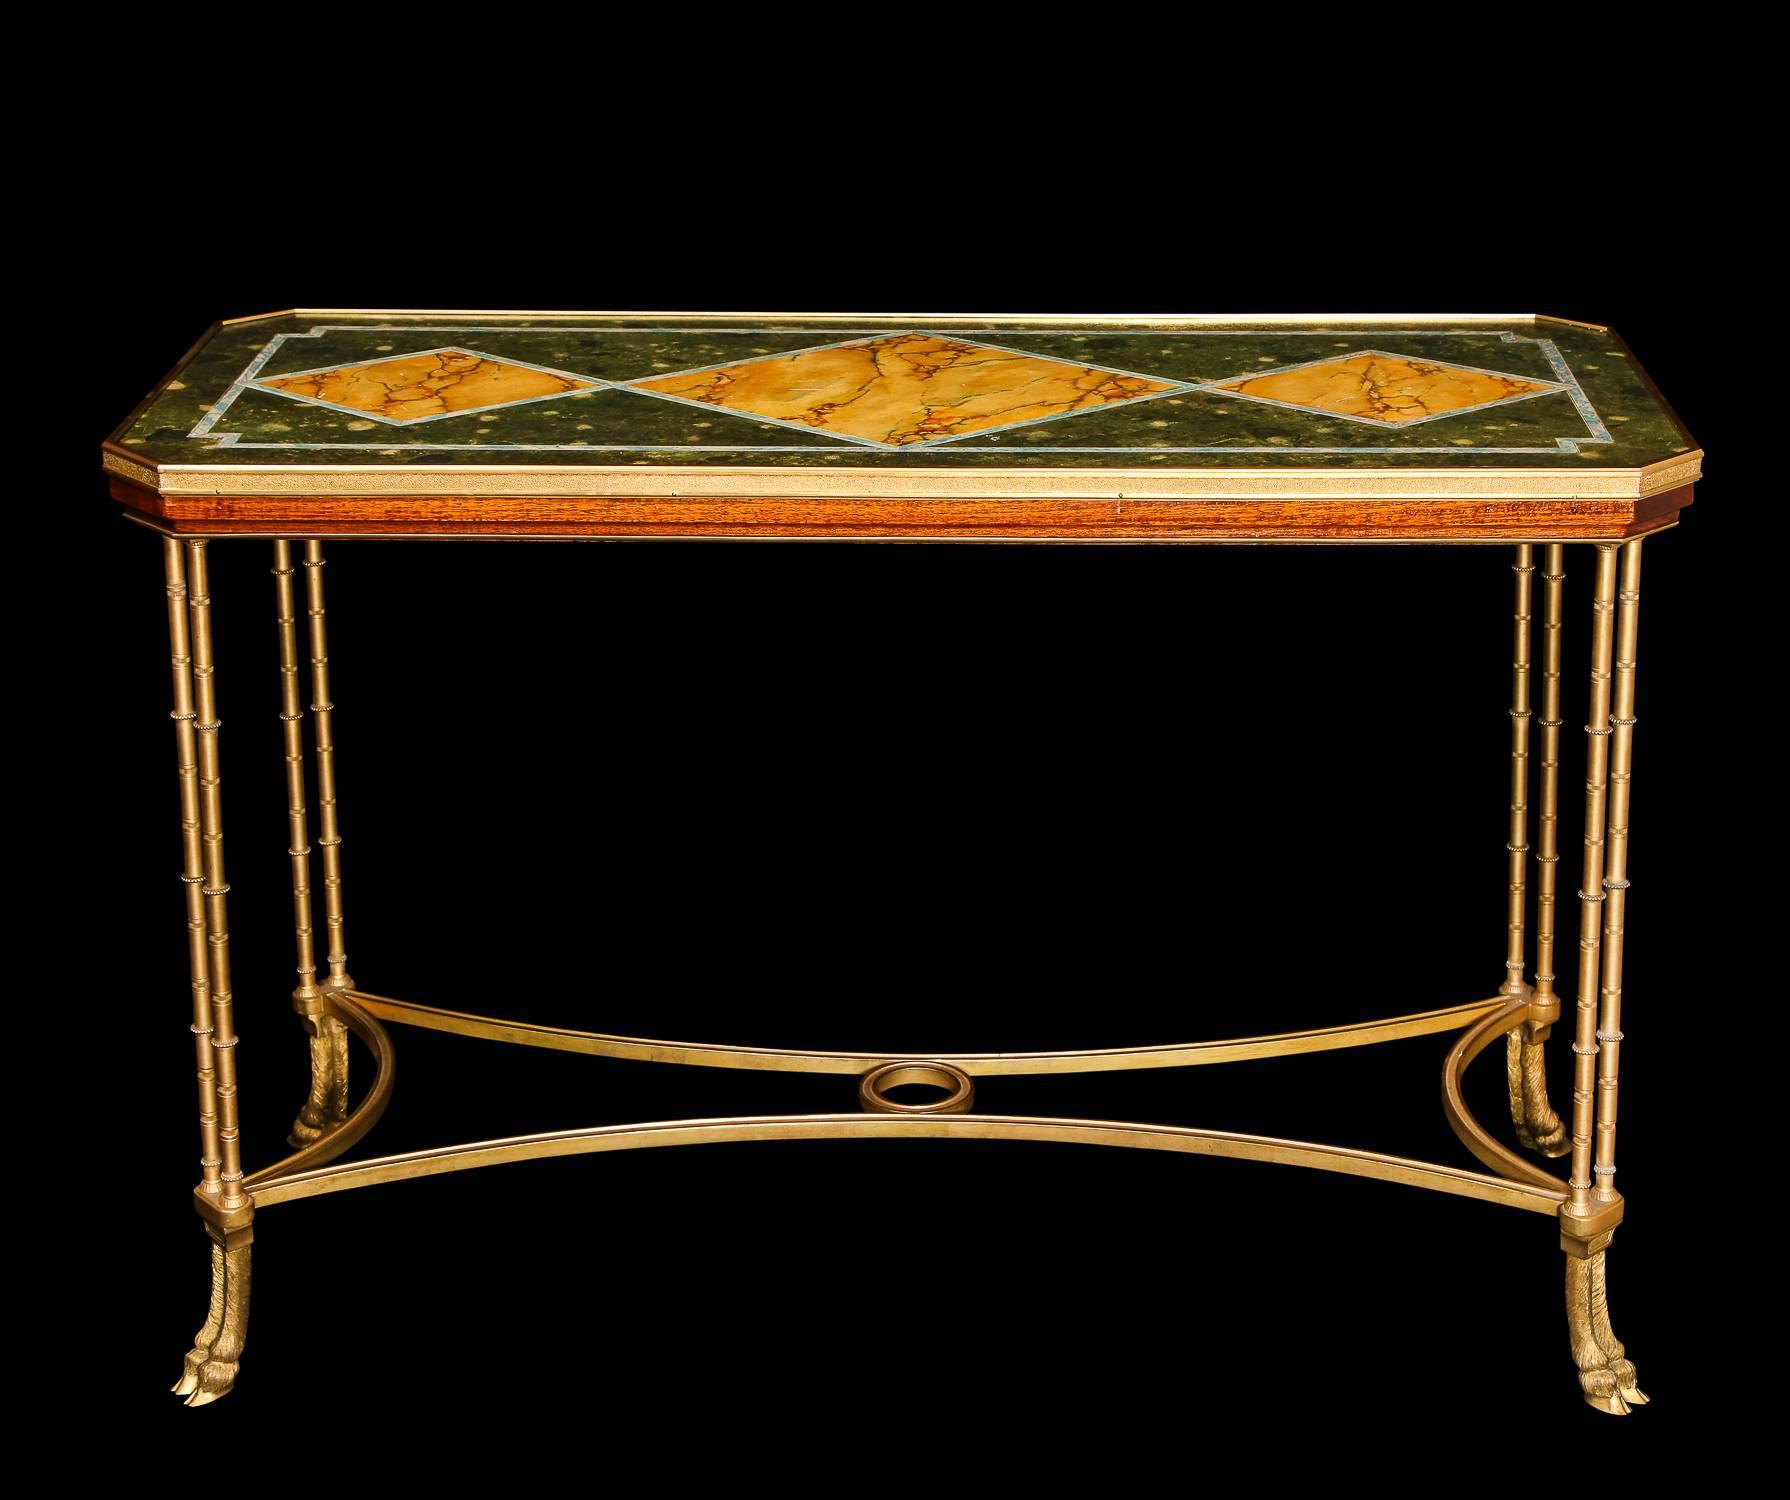 A pair of superb and unique antique French Louis XVI style rectangular form gilt bronze side or console tables of fine detail embellished hand painted faux marble wood tops, attributed to Jansen, Paris.